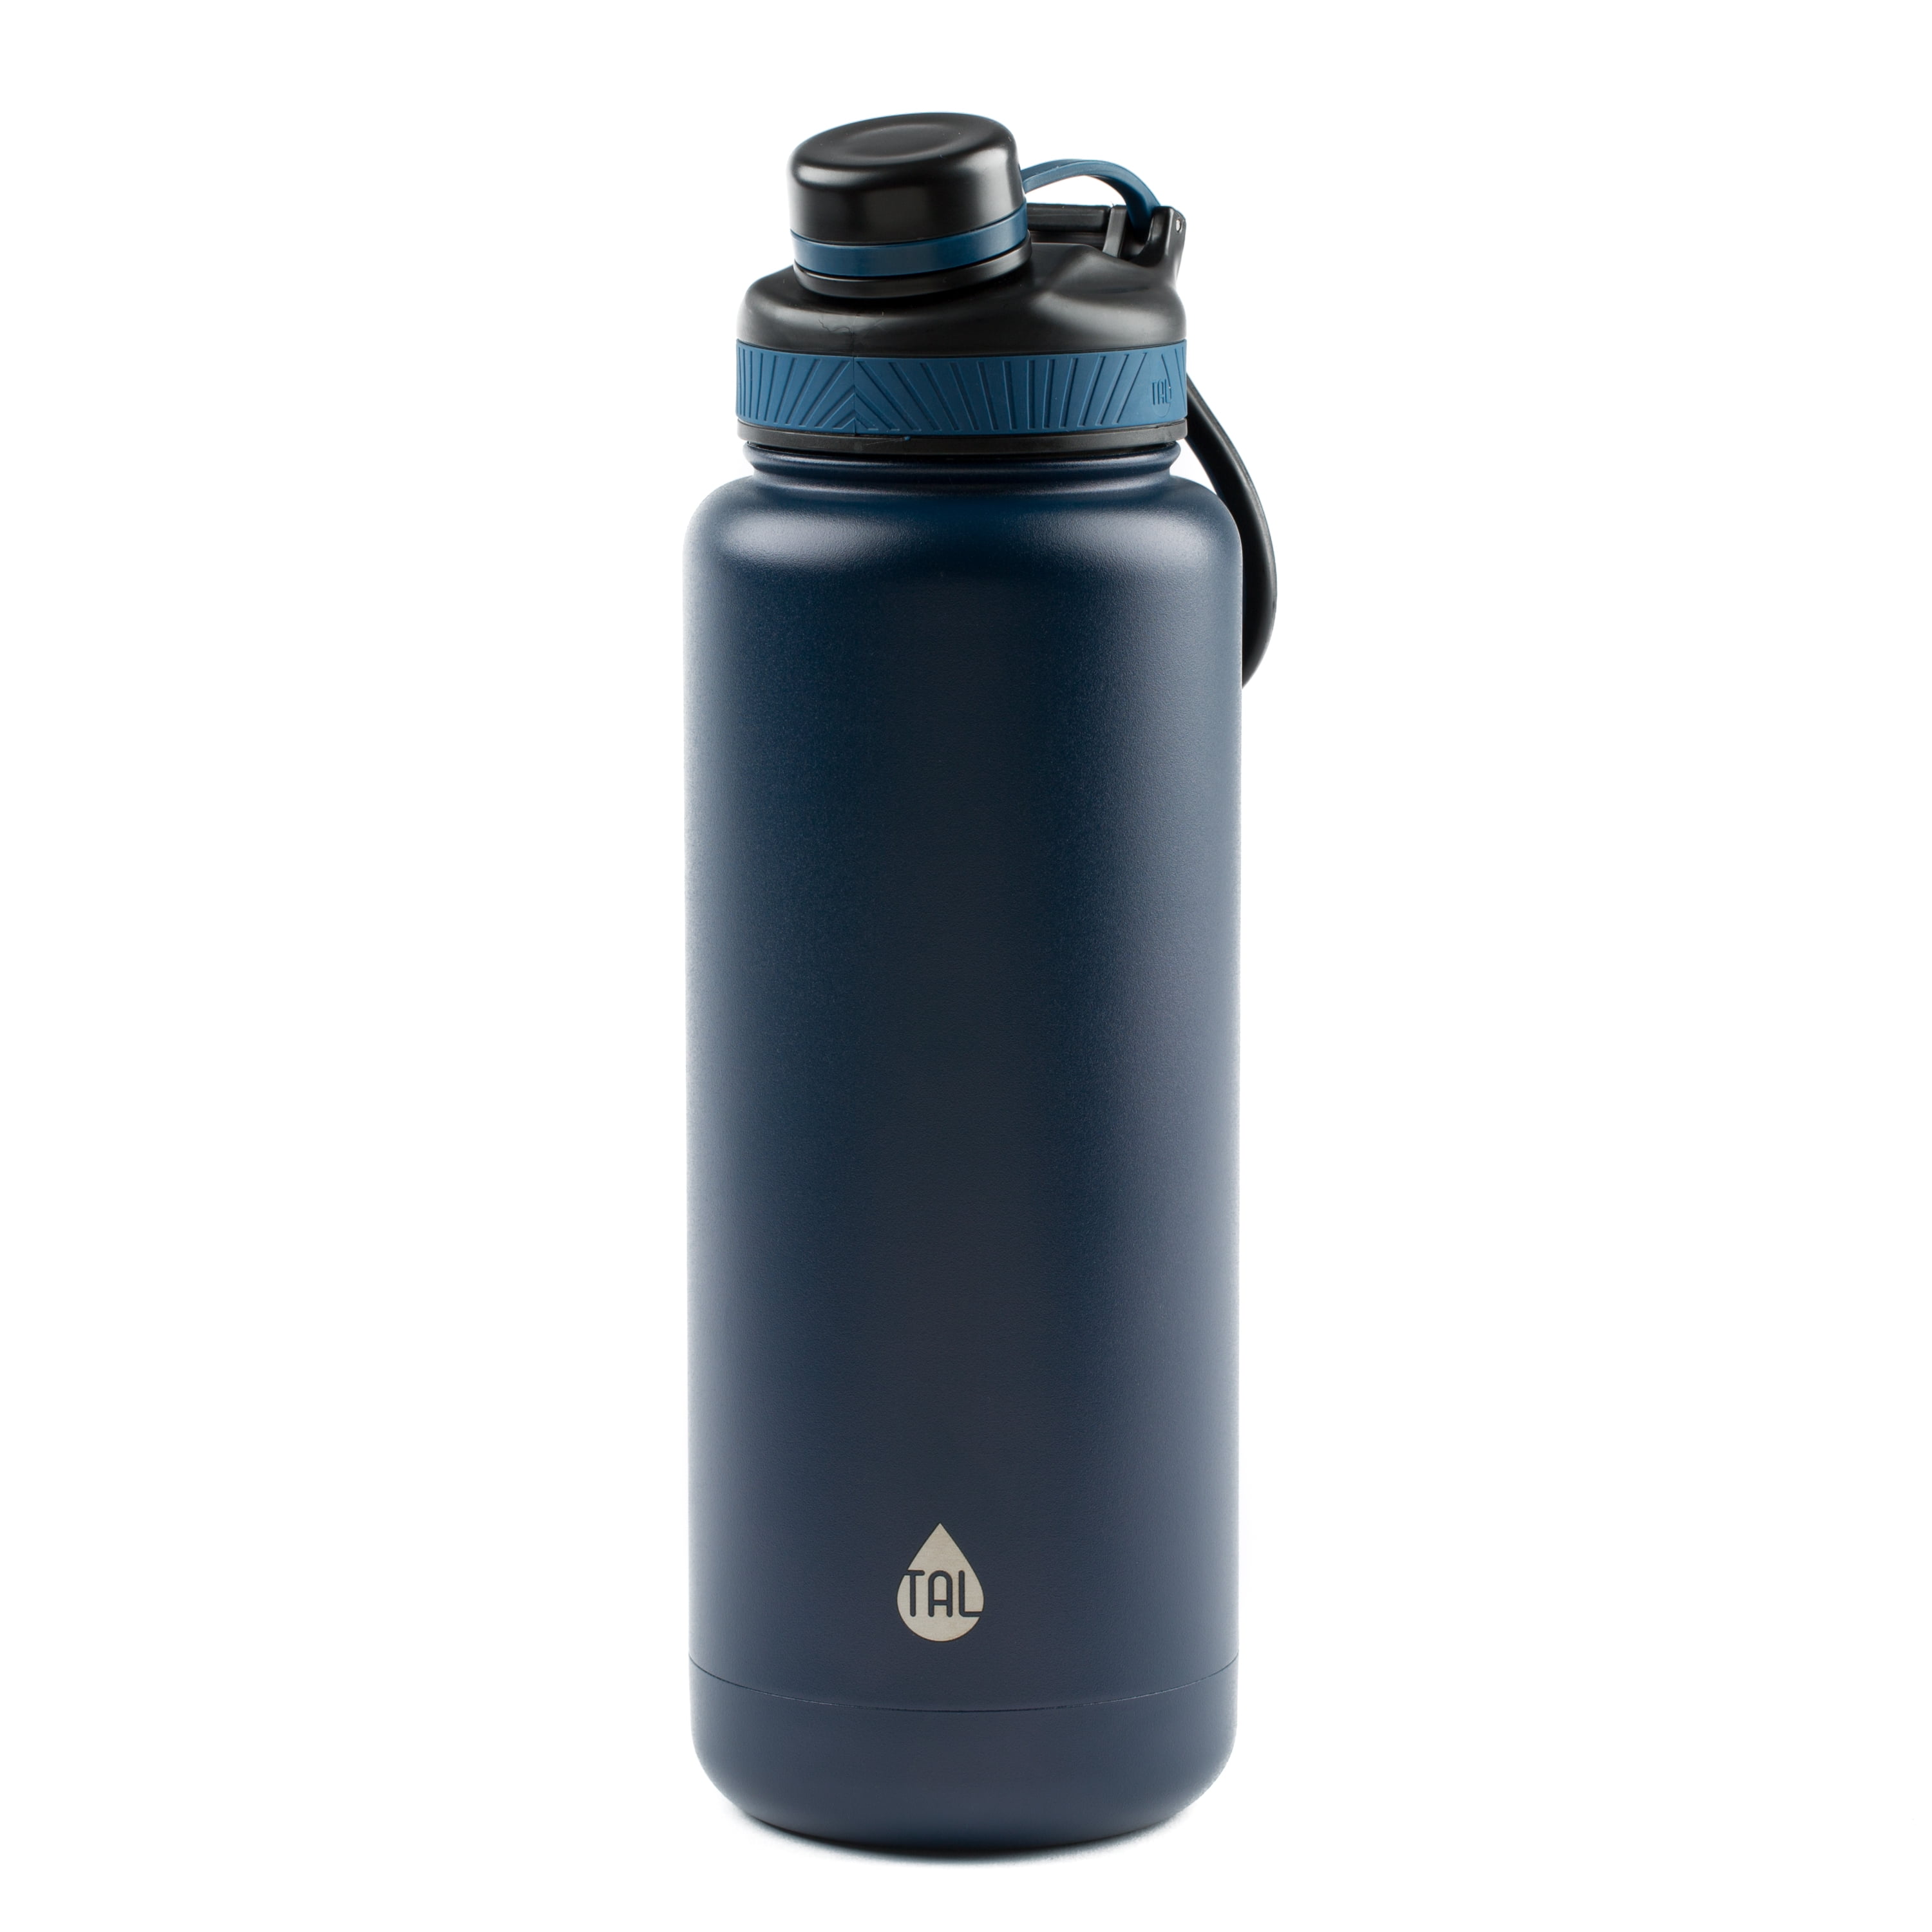 TAL Ranger 40 oz Navy and Black Insulated Stainless Steel Water Bottle with  Wide Mouth and Flip-Top Lid - Walmart.com